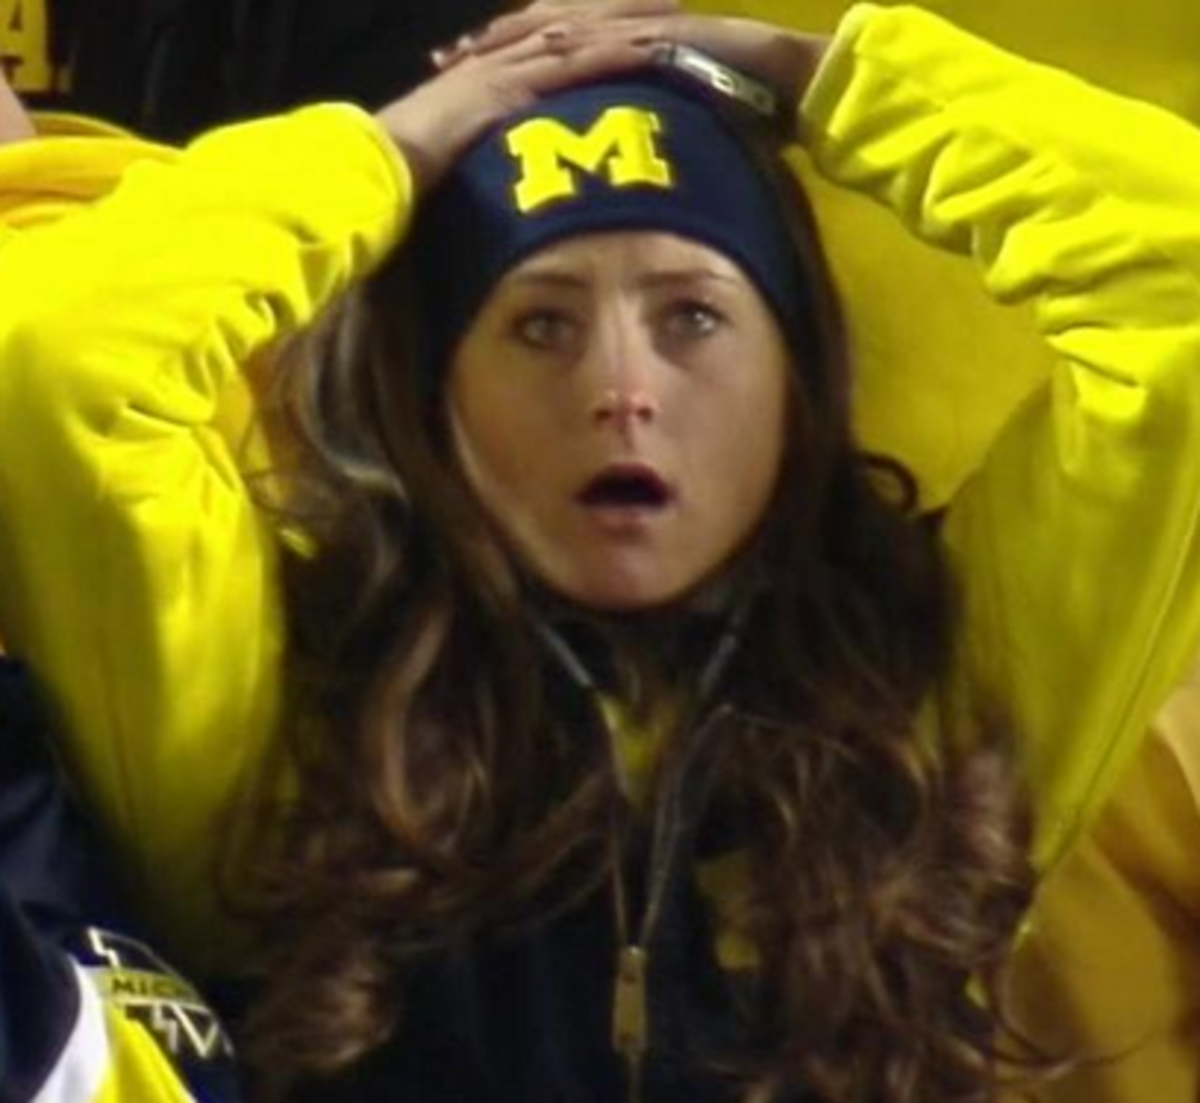 A Michigan fans reaction to the end of the Michigan Michigan State game.